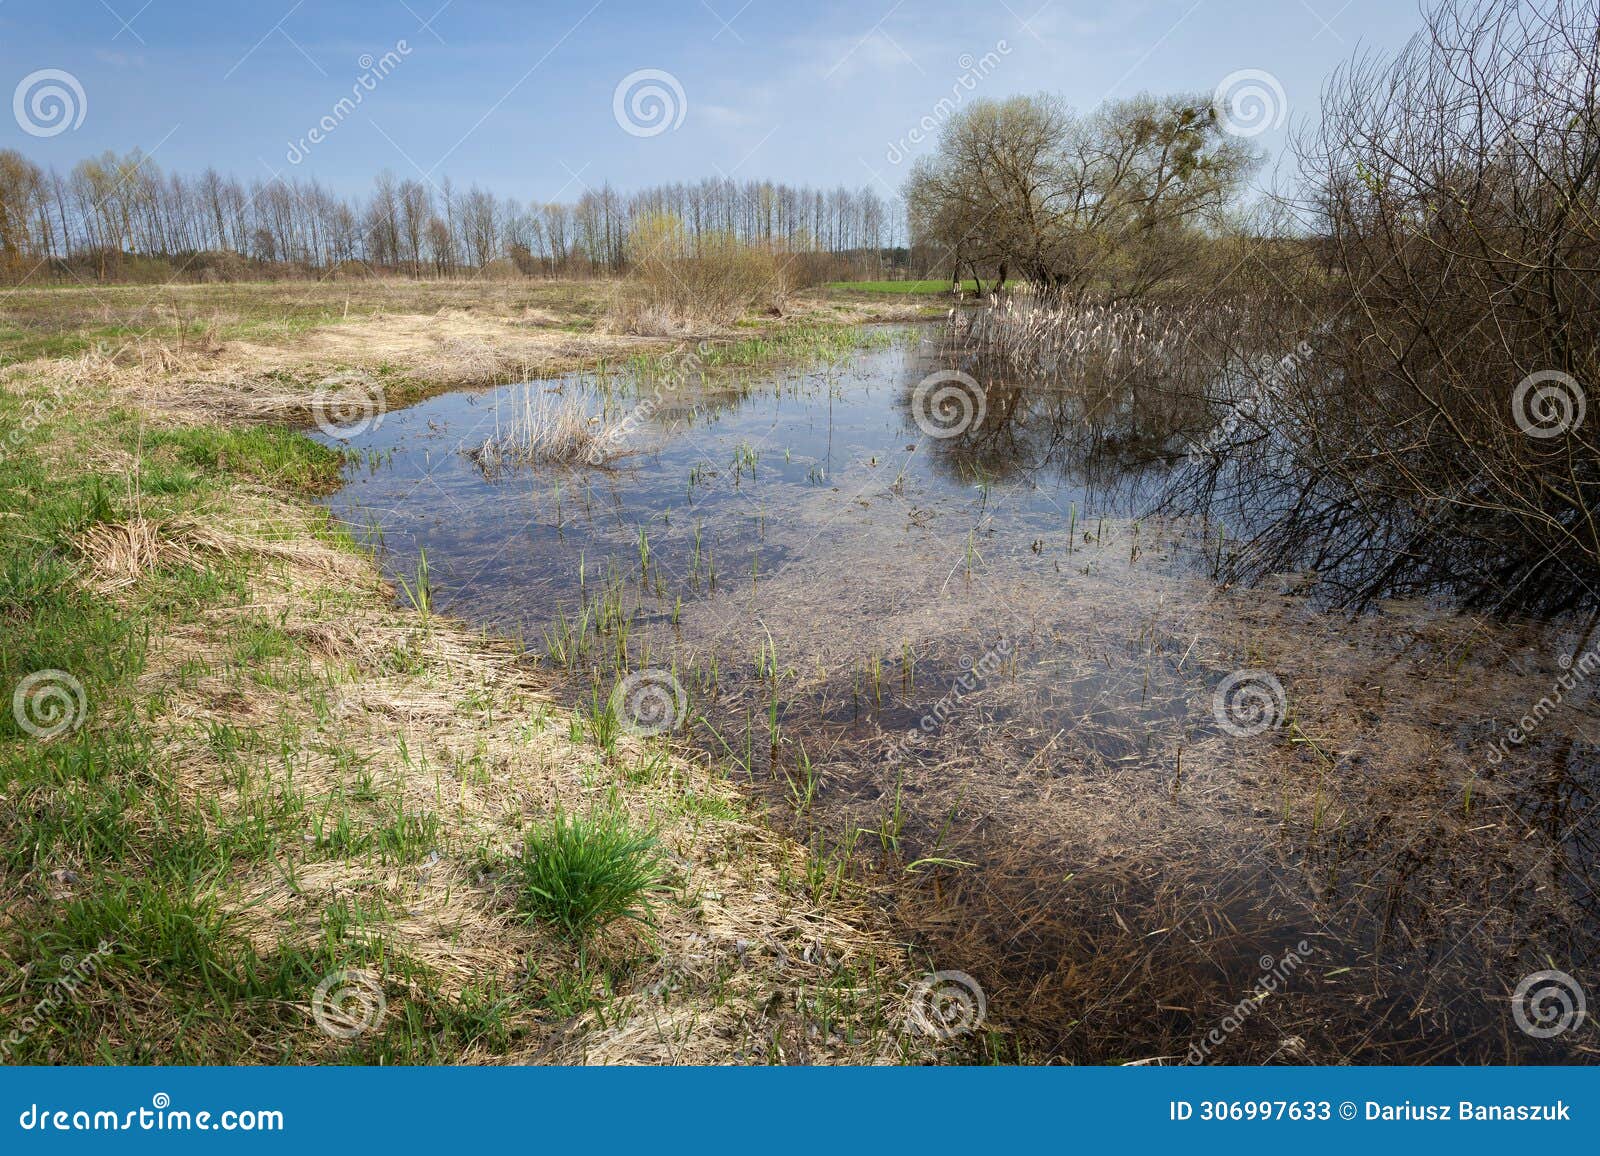 wet areas in an uncultivated meadow